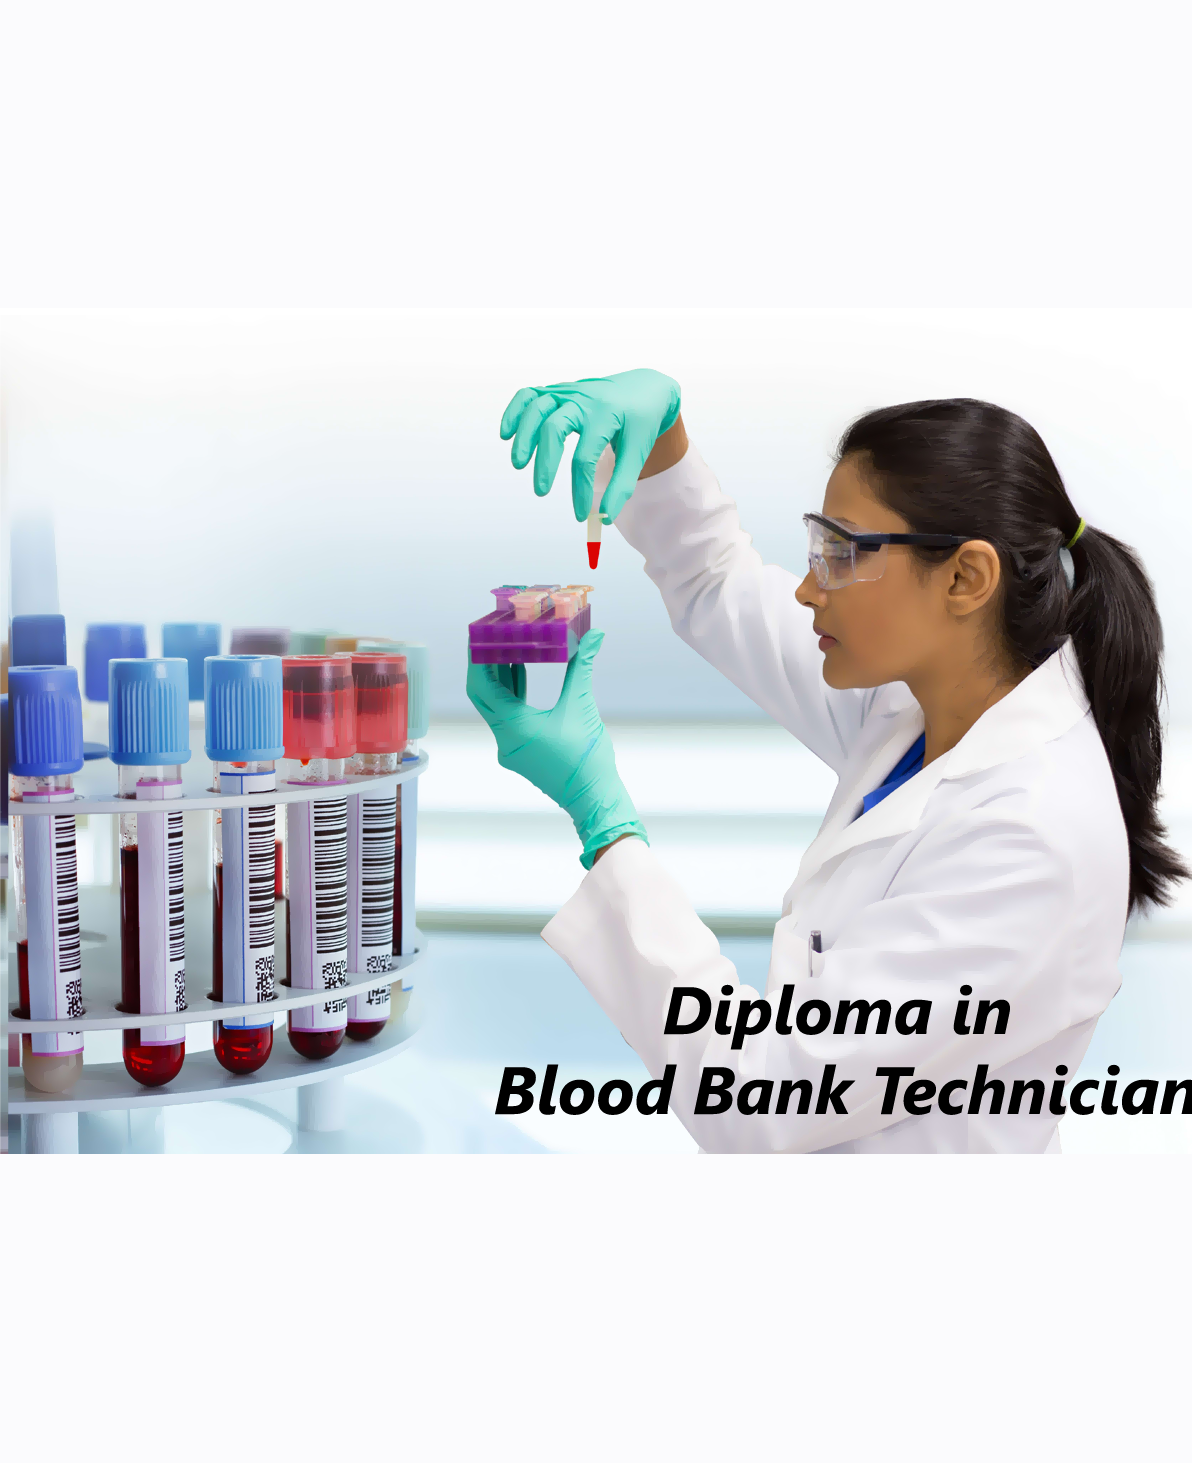 Diploma in Blood Bank Technician